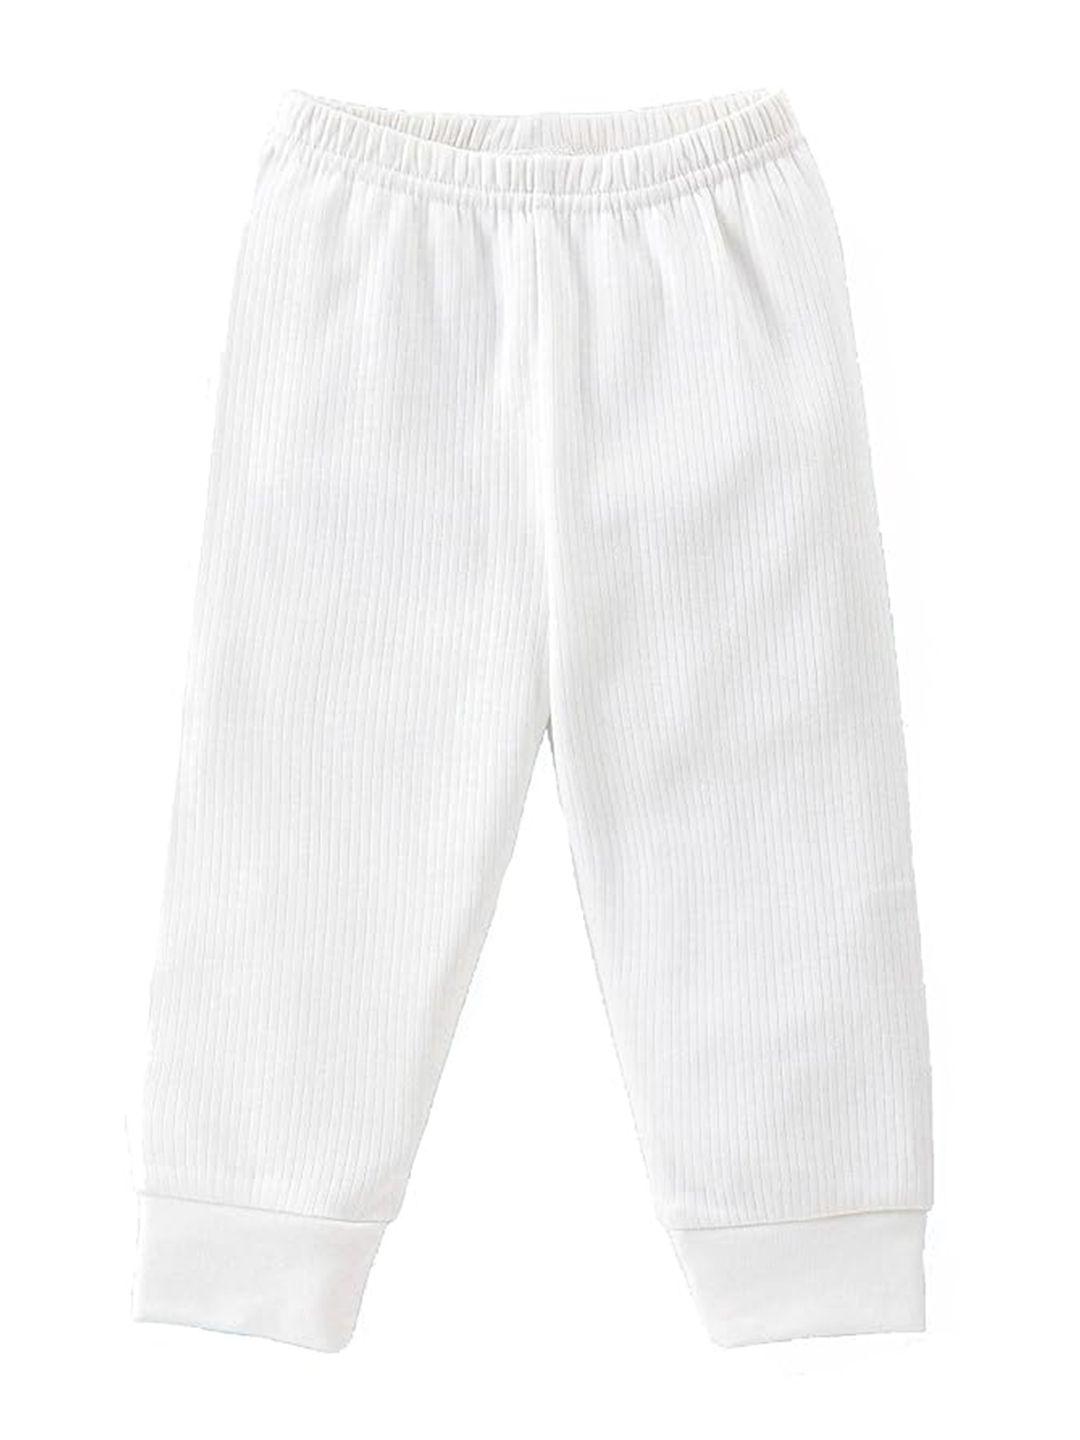 baesd kids cotton thermal bottoms